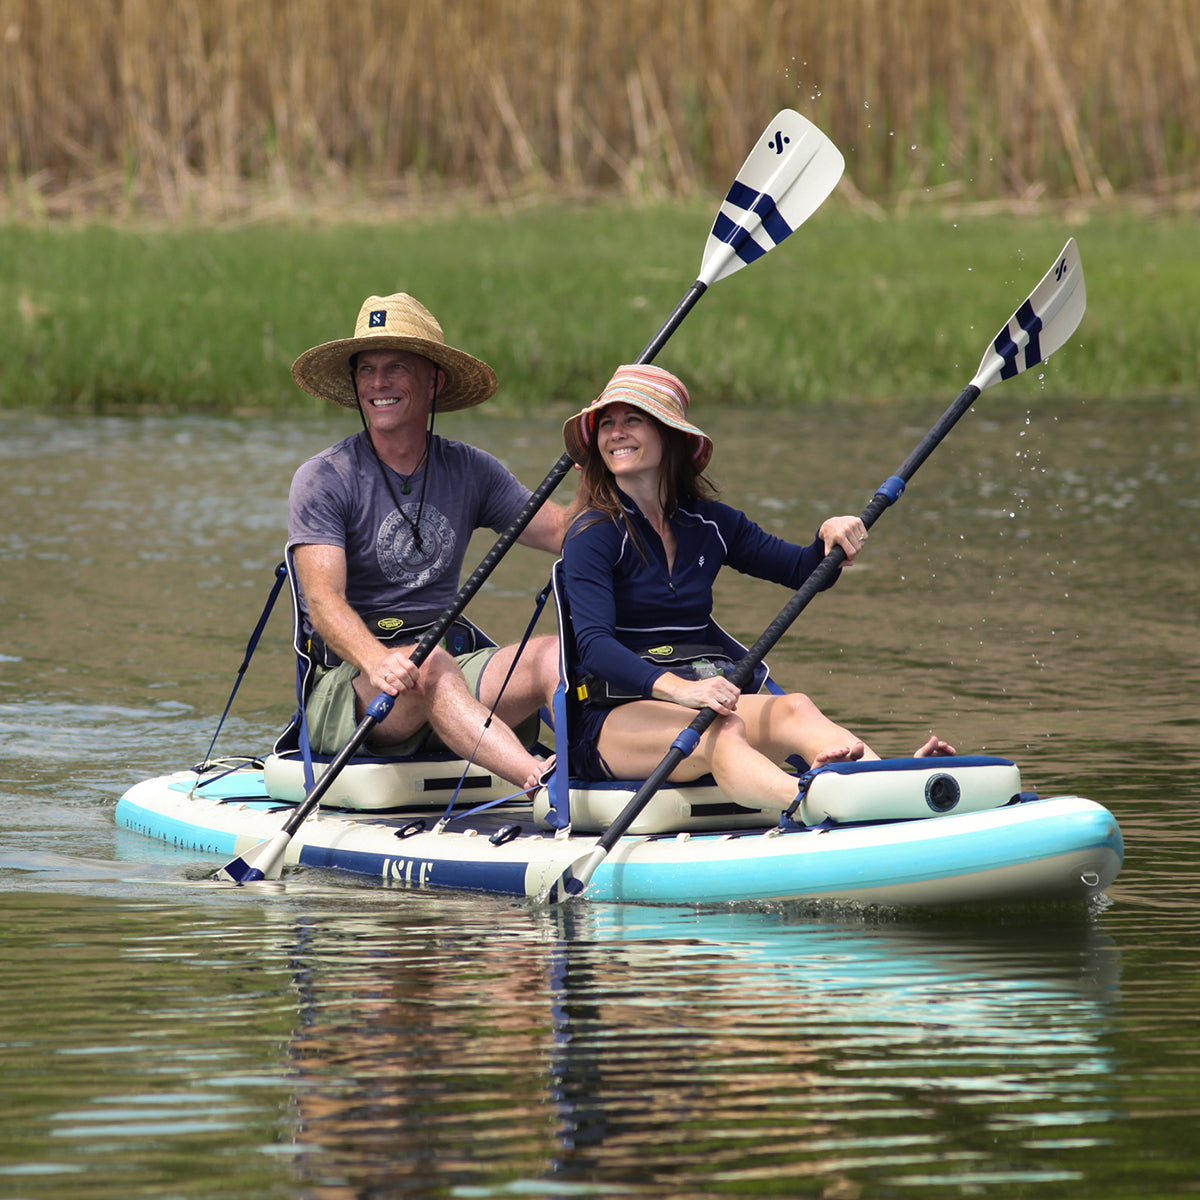 Cloud Kayak Seat Being Used on a Paddle Board